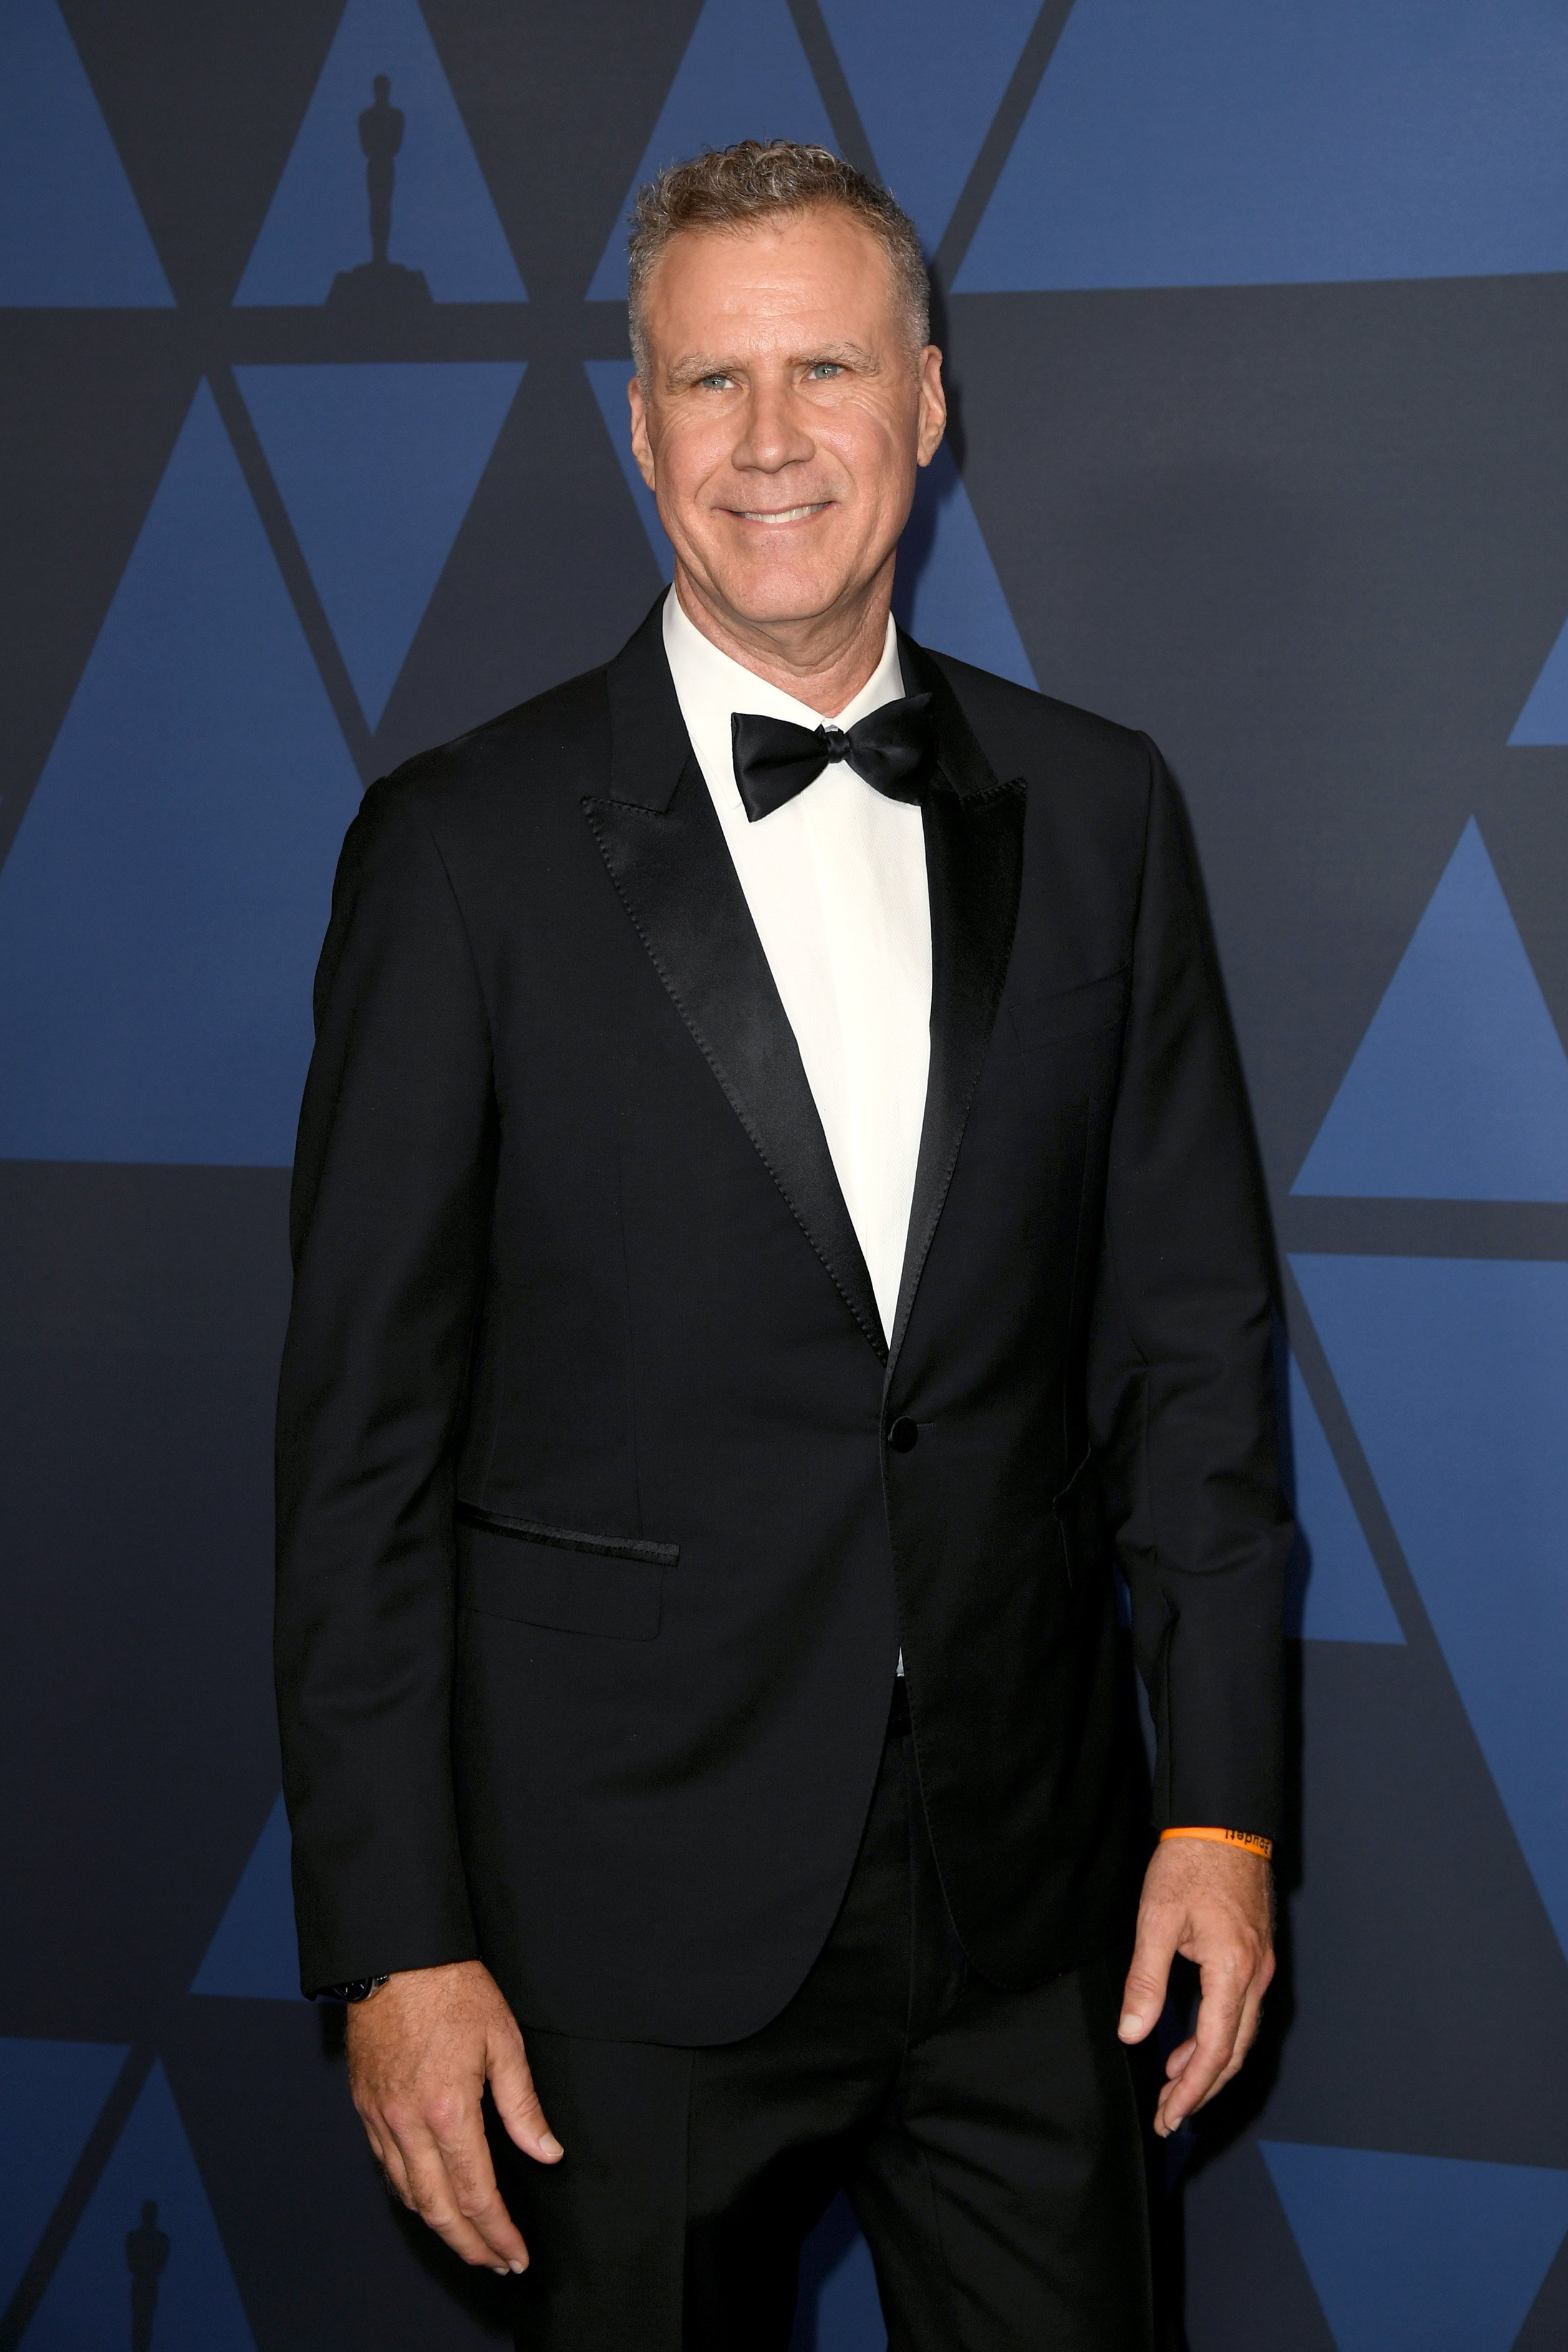 Will Ferrell attends the 11th Annual Governors Awards in Hollywood, California on October 27, 2019 | Photo: Getty Images